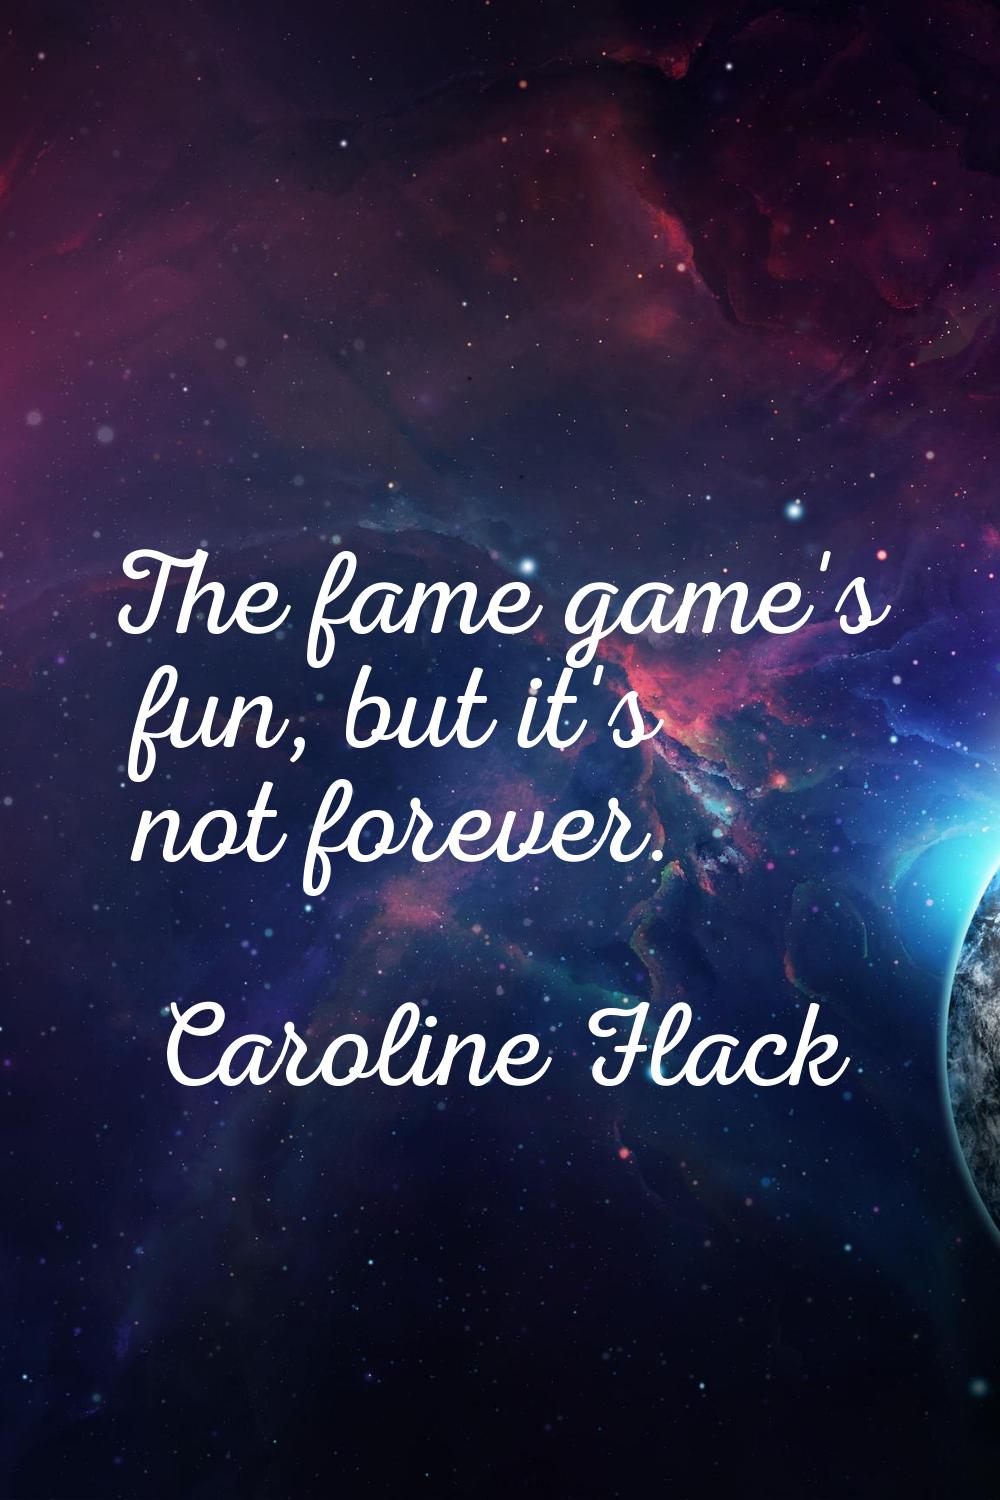 The fame game's fun, but it's not forever.